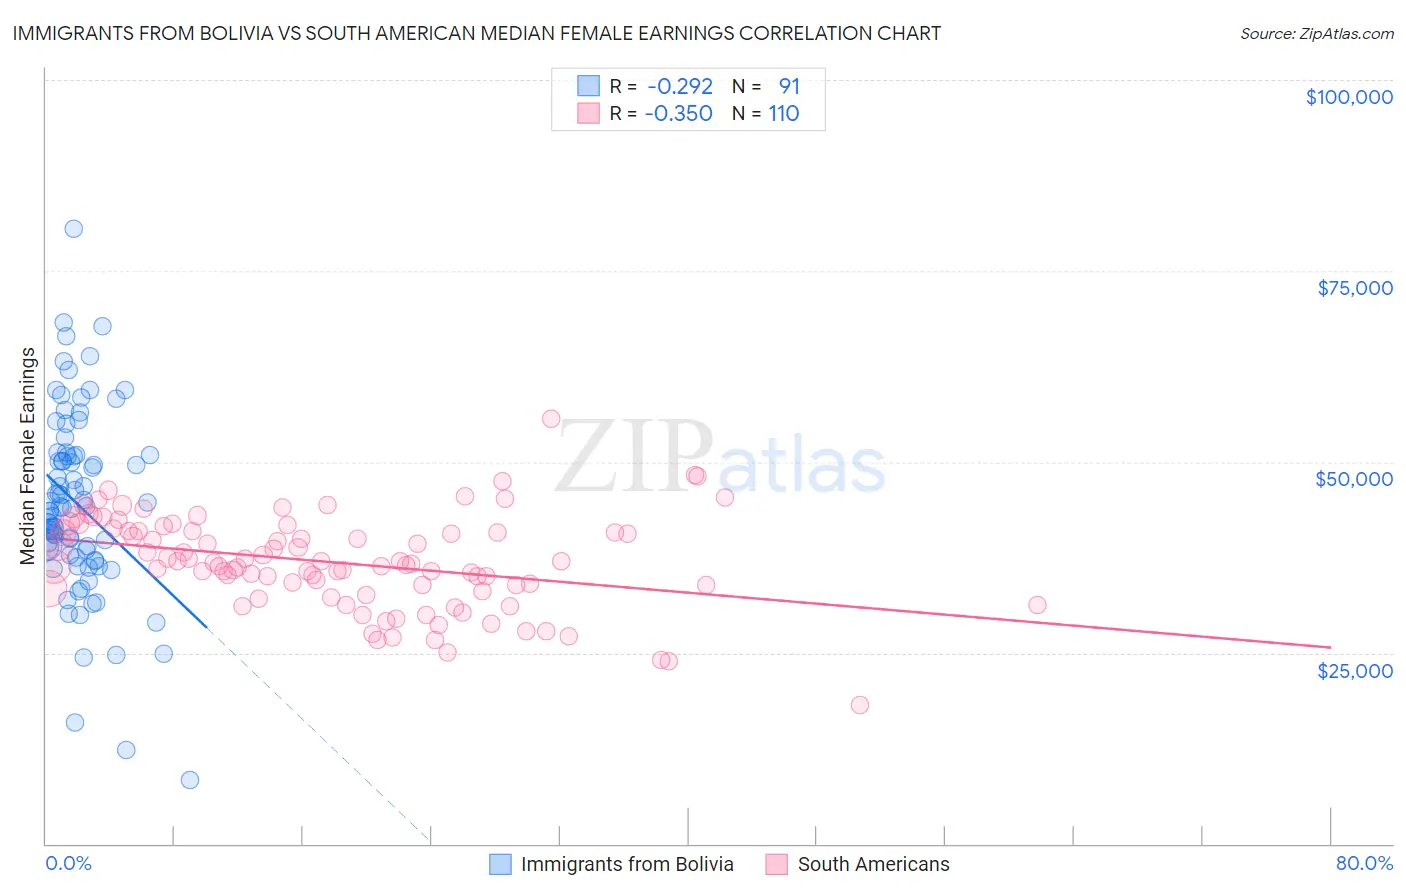 Immigrants from Bolivia vs South American Median Female Earnings